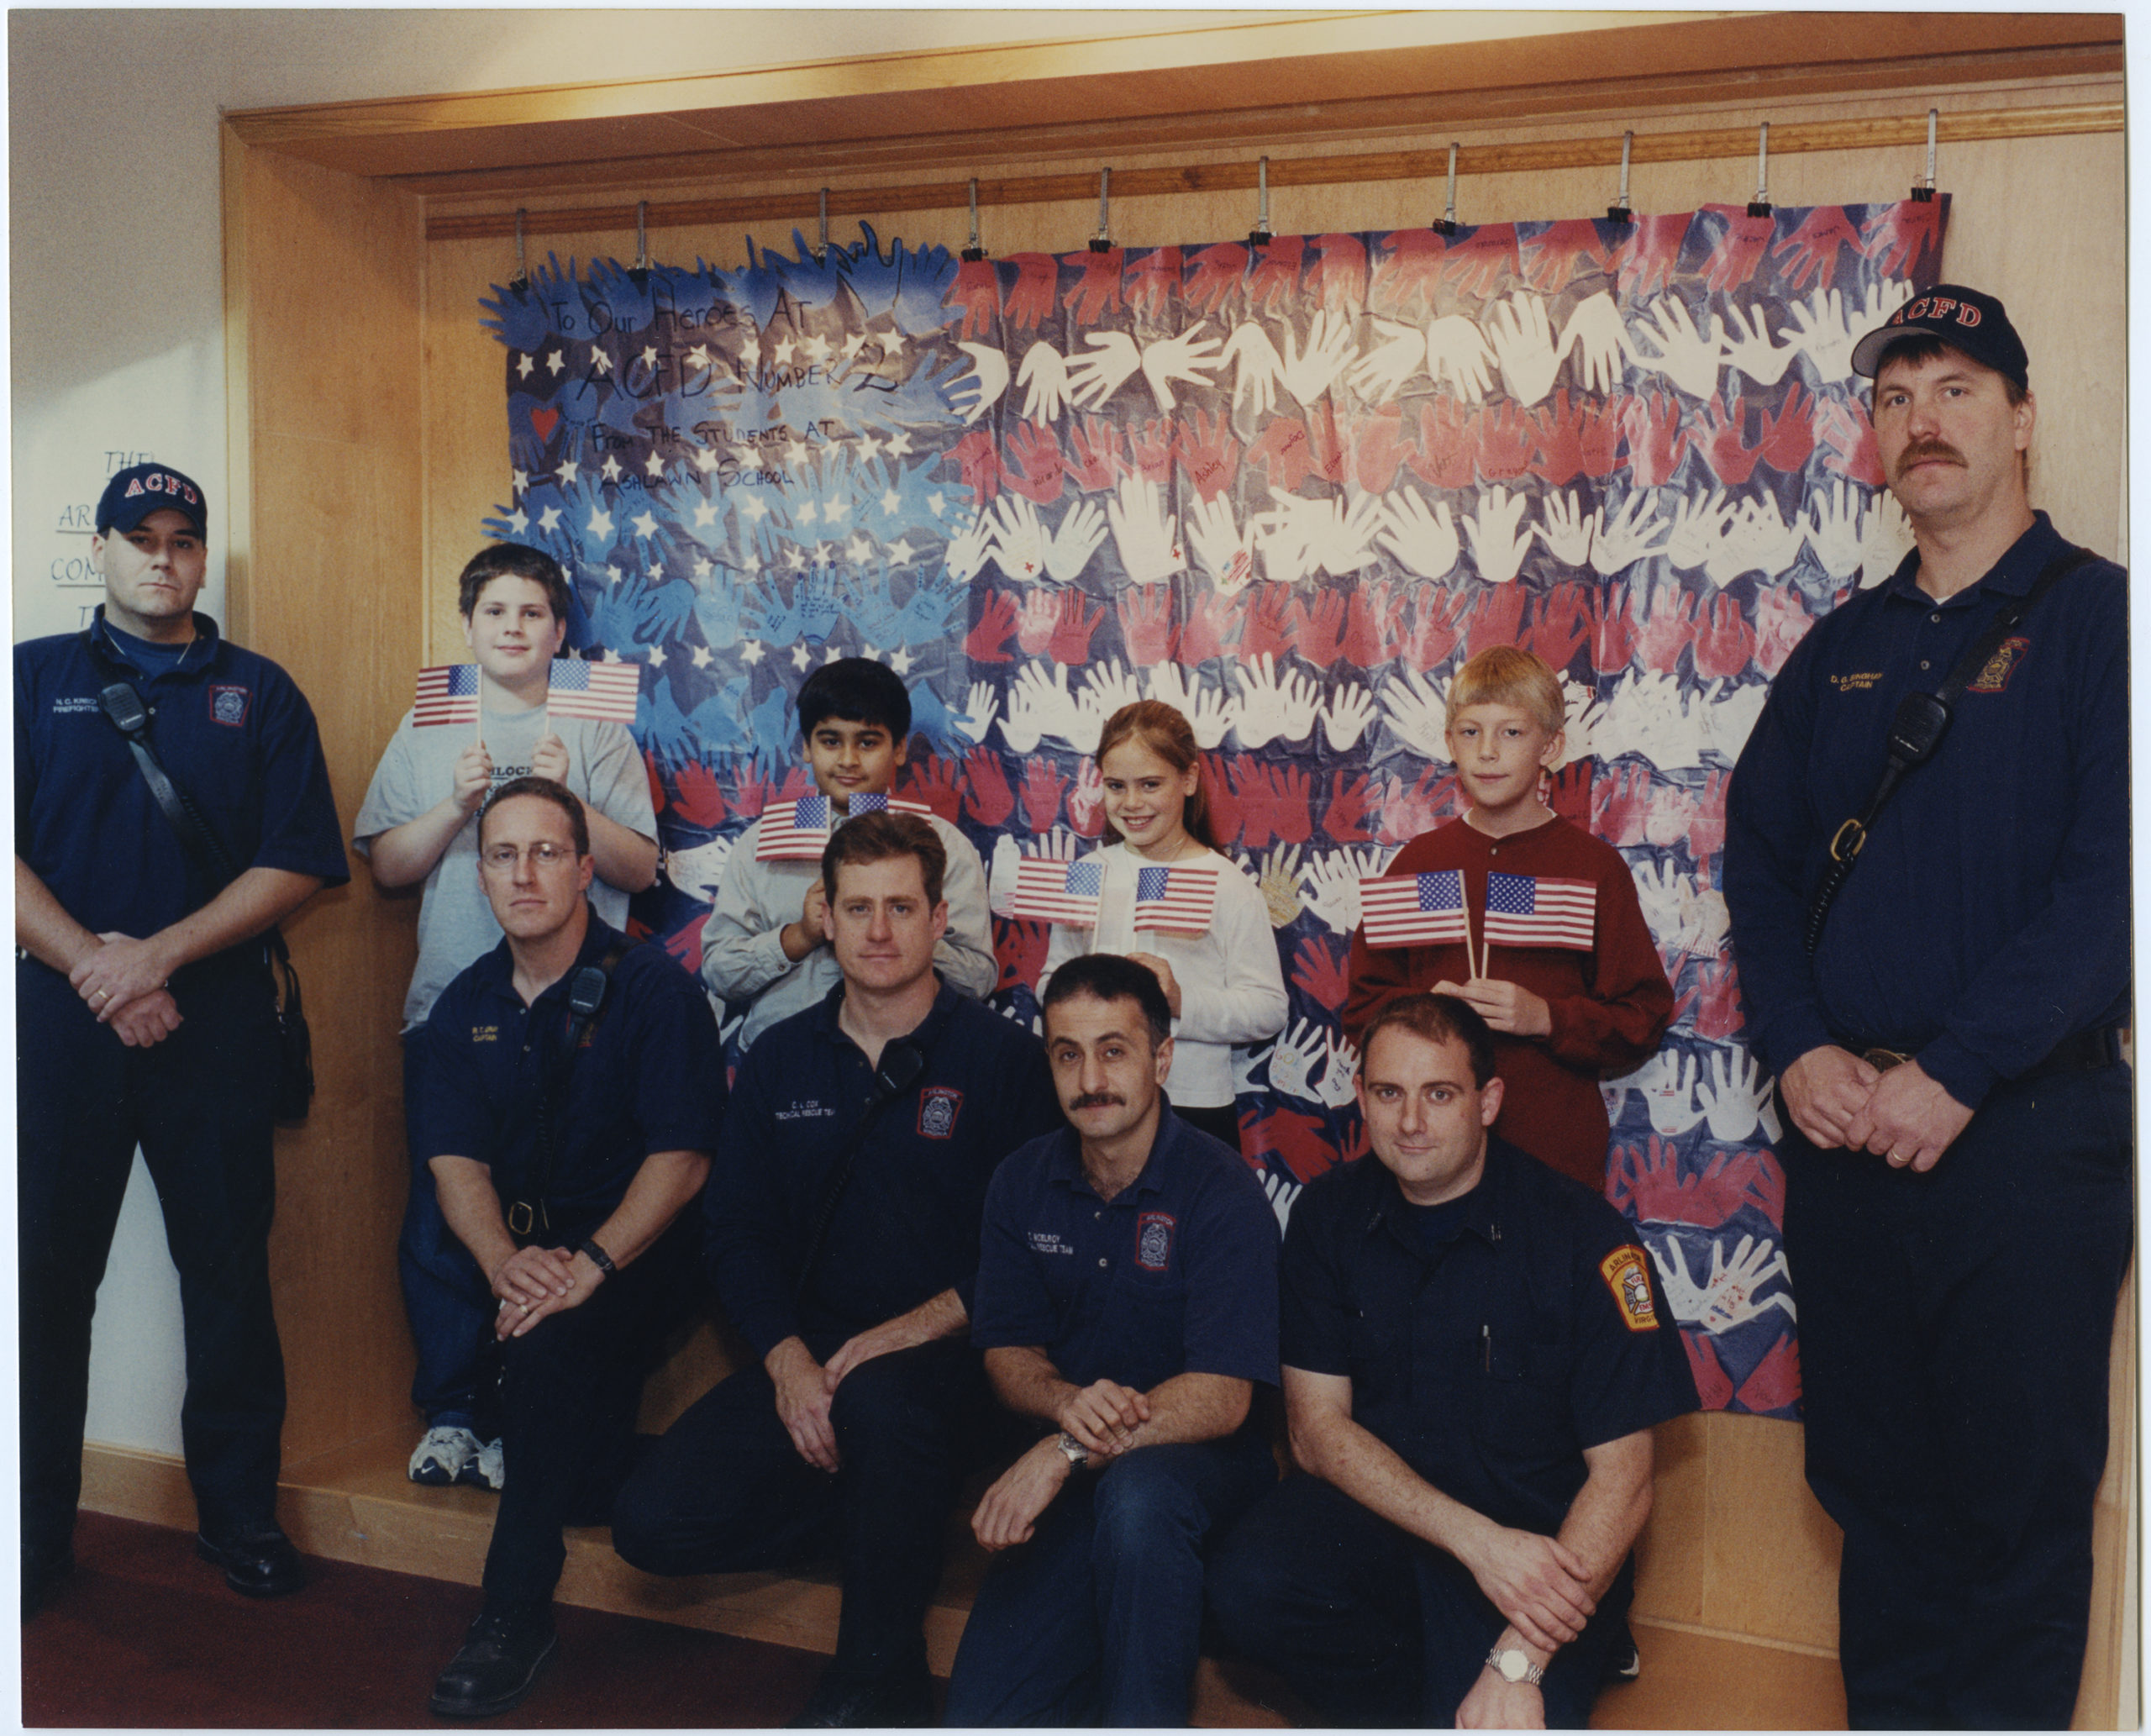 Members of the Arlington County Fire Department posing with children in front of a mural created to thank them for their service.  2001, 1 print, col., 8 x 10 in..